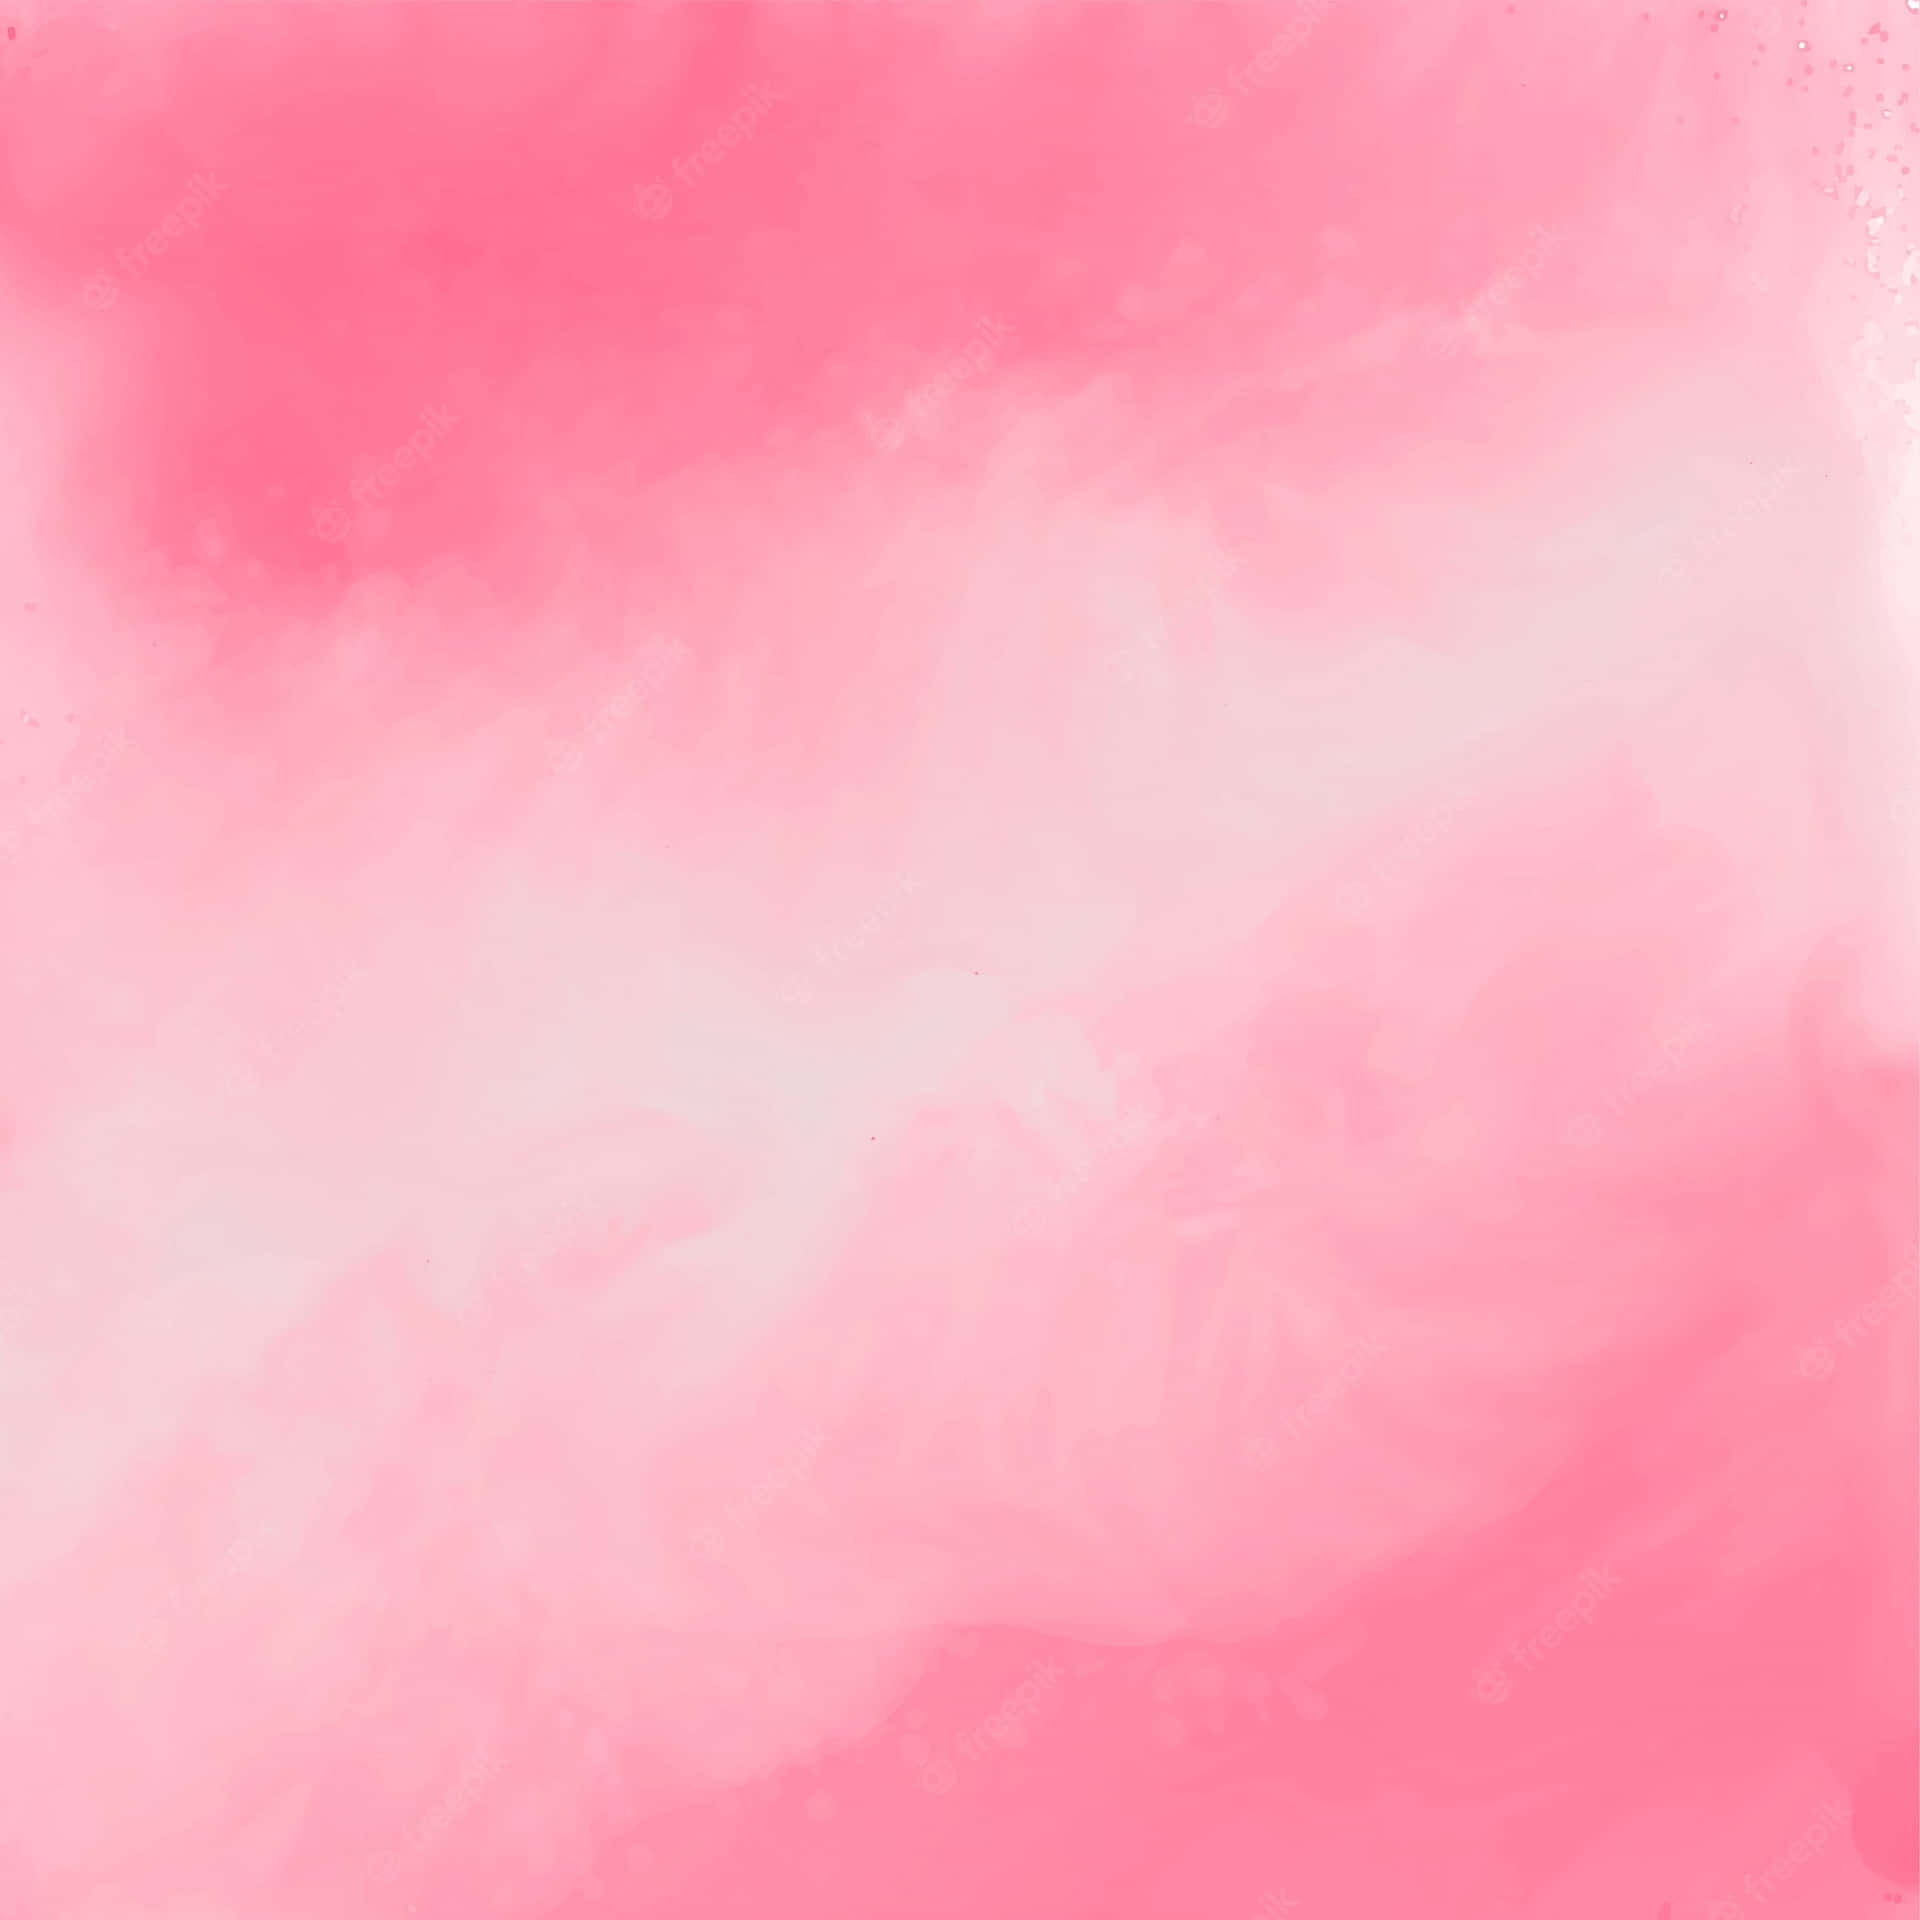 A pastel pink texture background